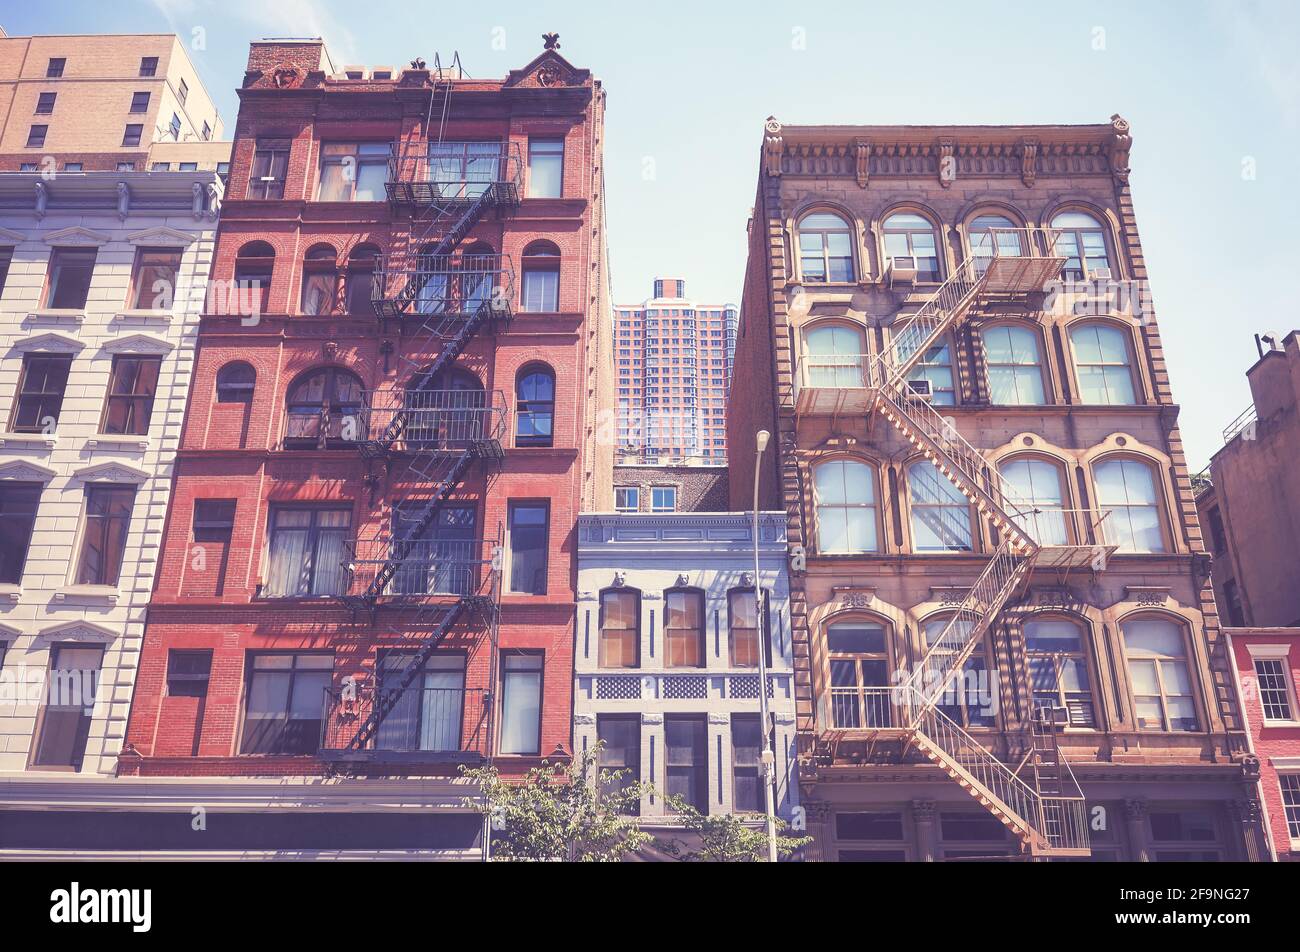 Old buildings with fire escapes in New York City, color toning applied, USA. Stock Photo